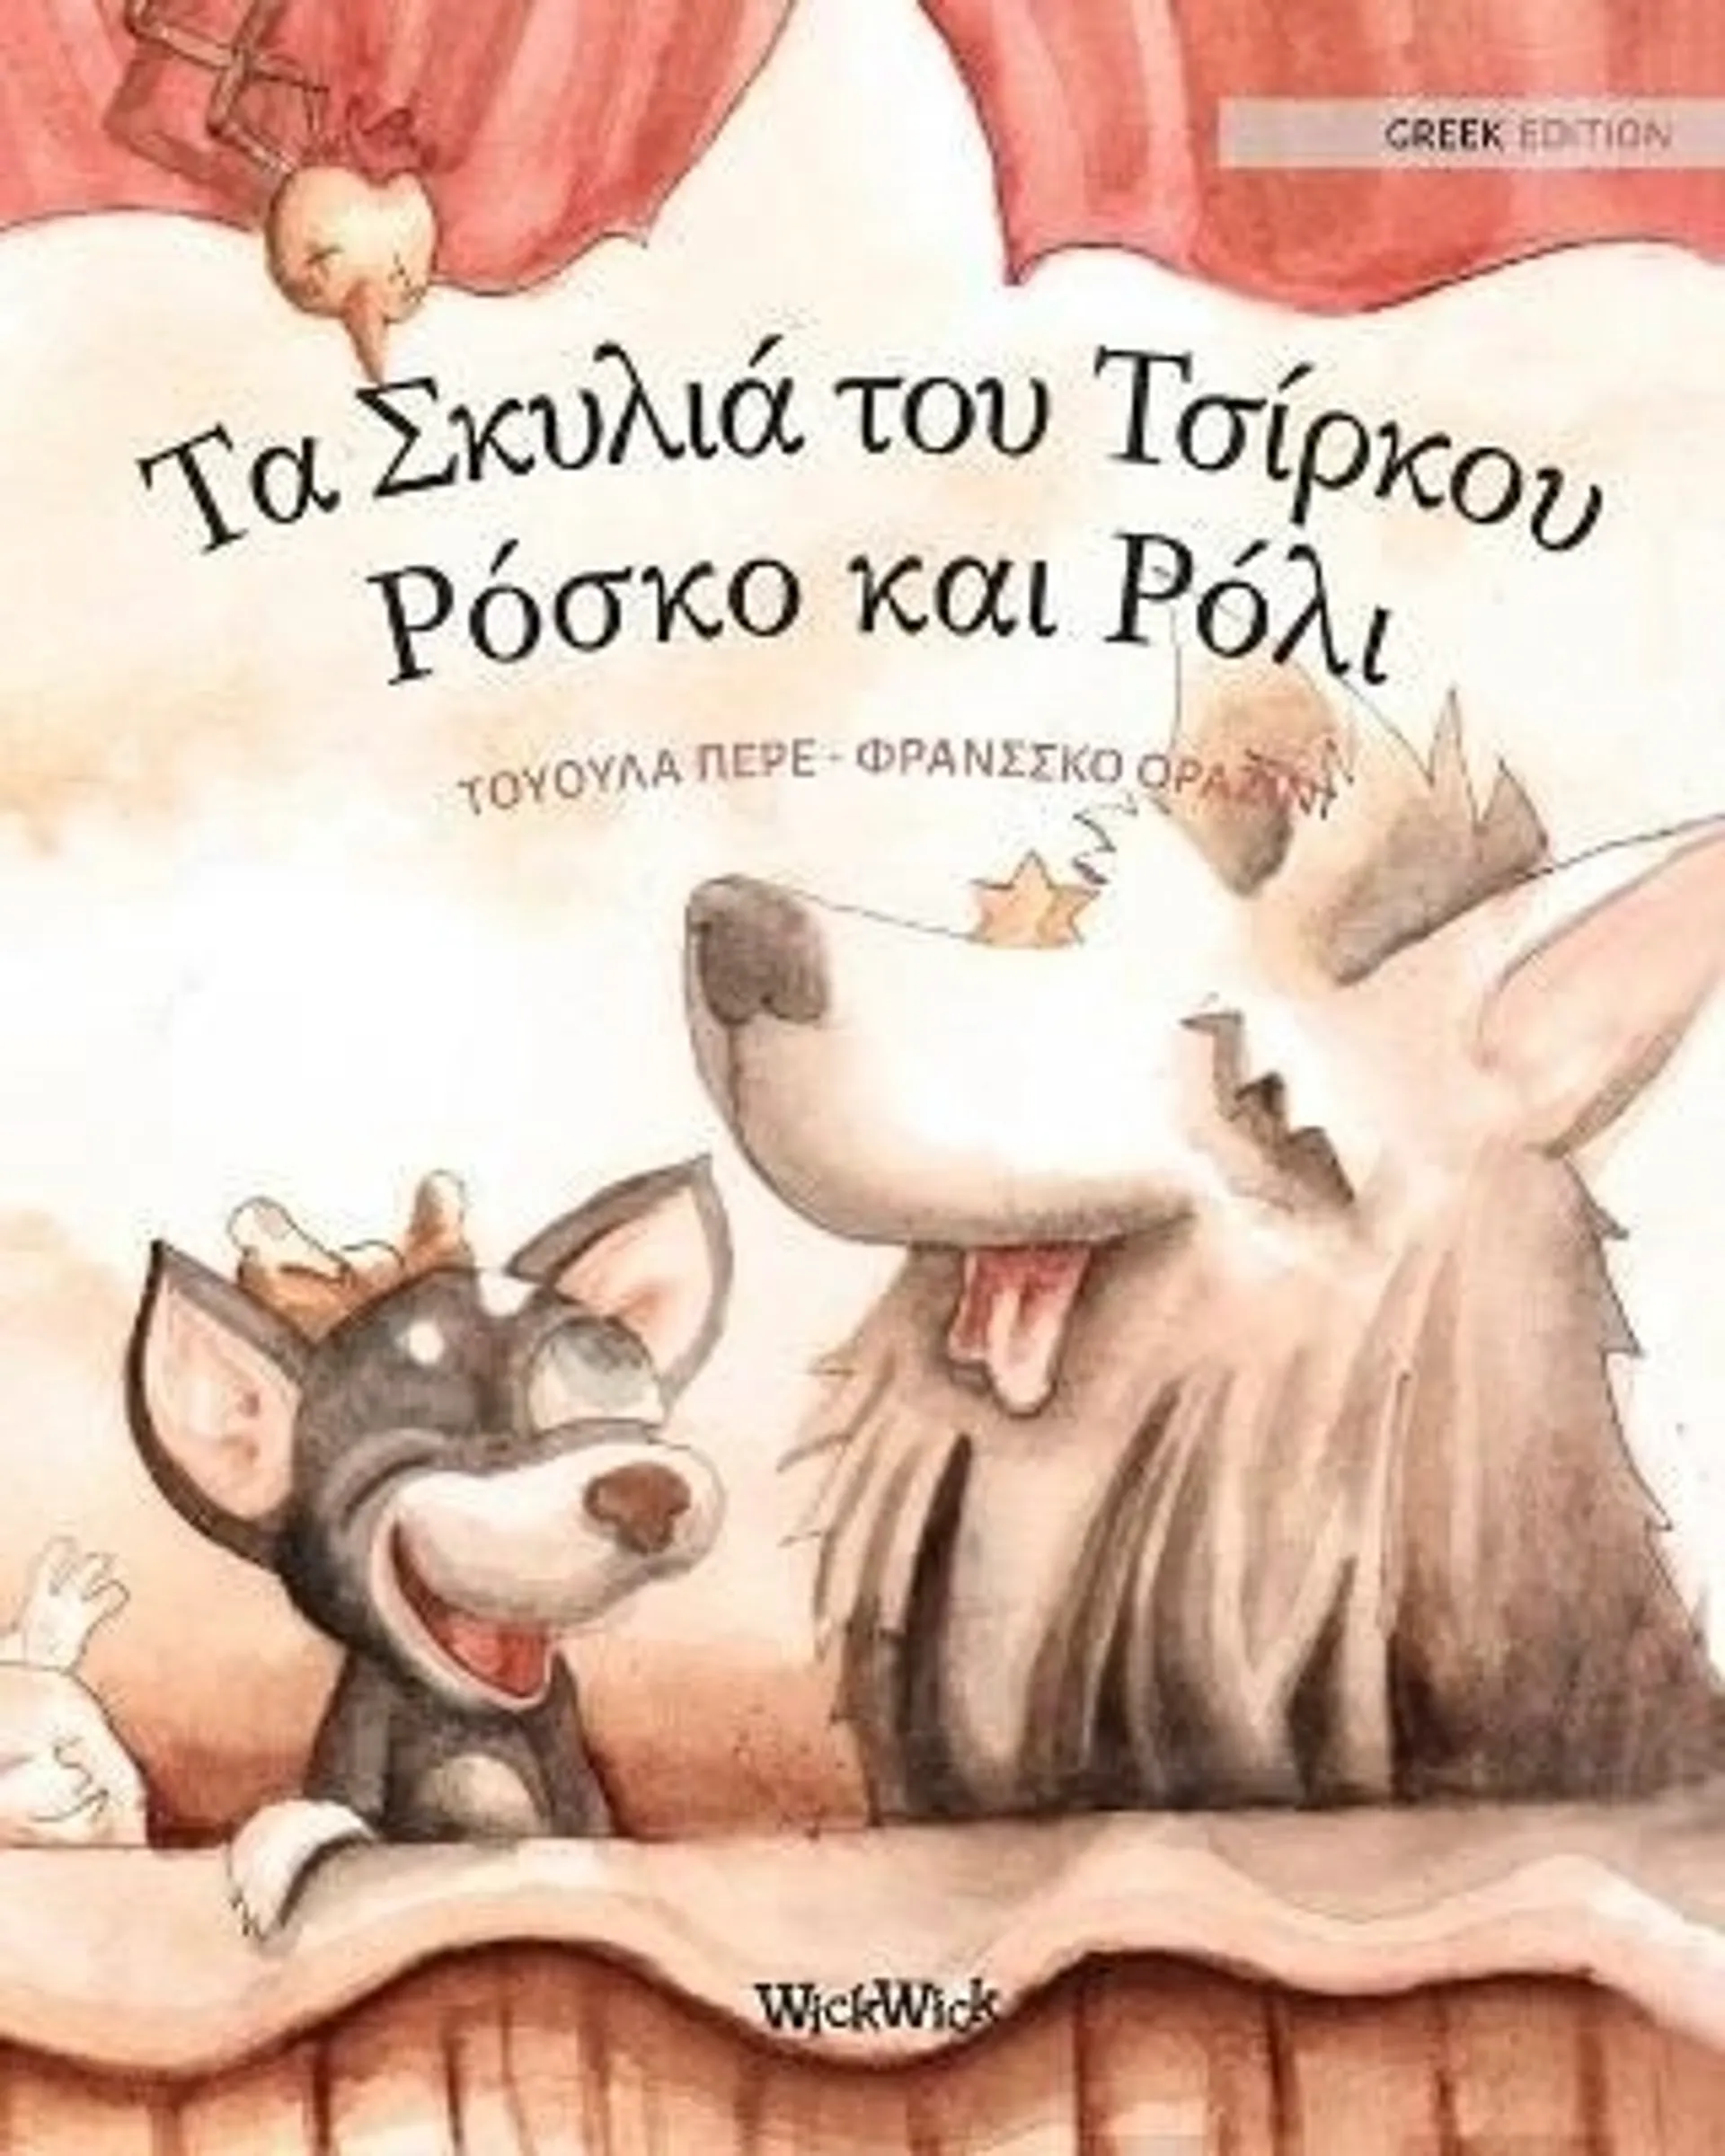 Pere, Greek Edition of "Circus Dogs Roscoe and Rolly"